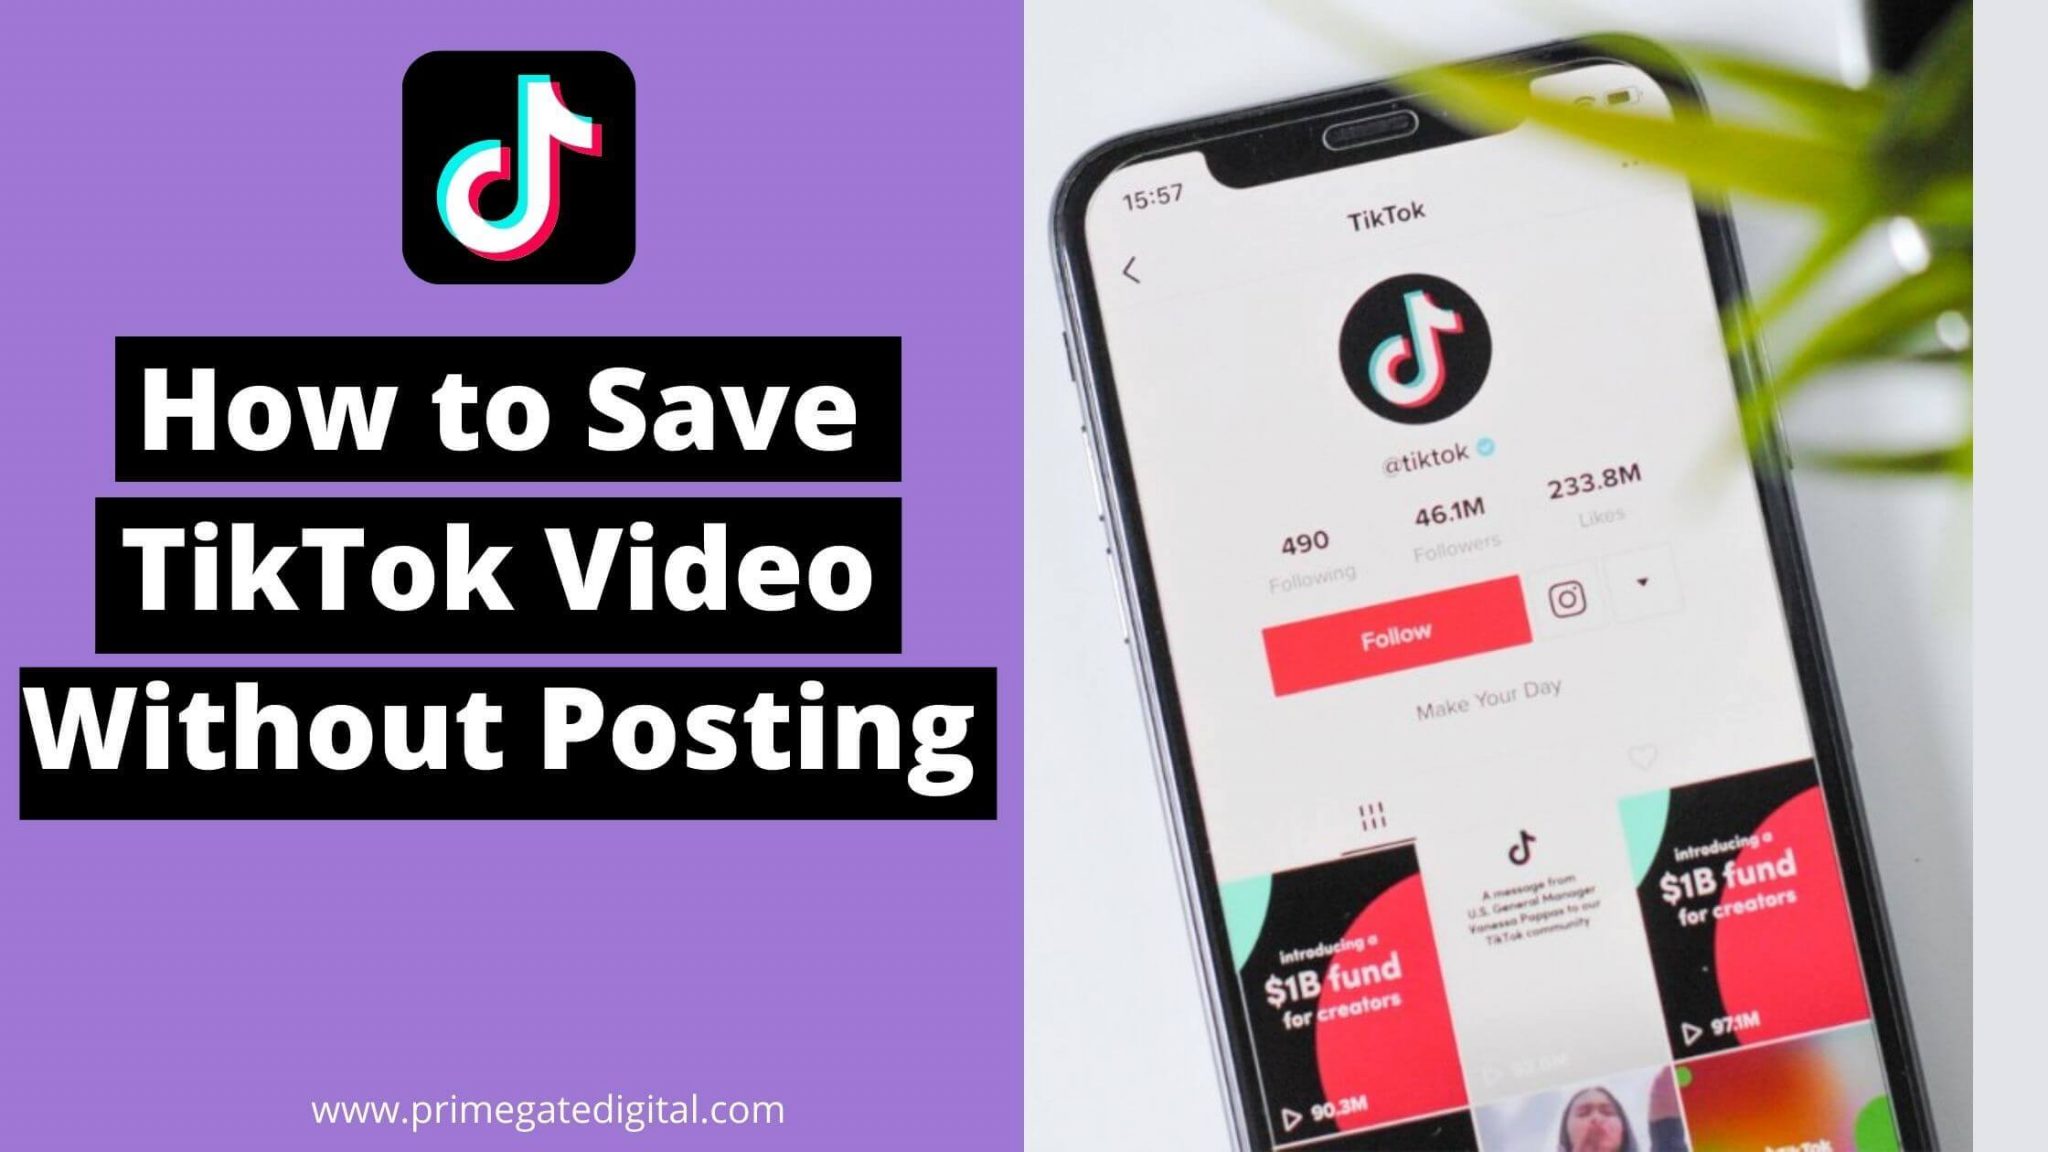 How To Save Tiktok Video Without Posting 2022 Revealed